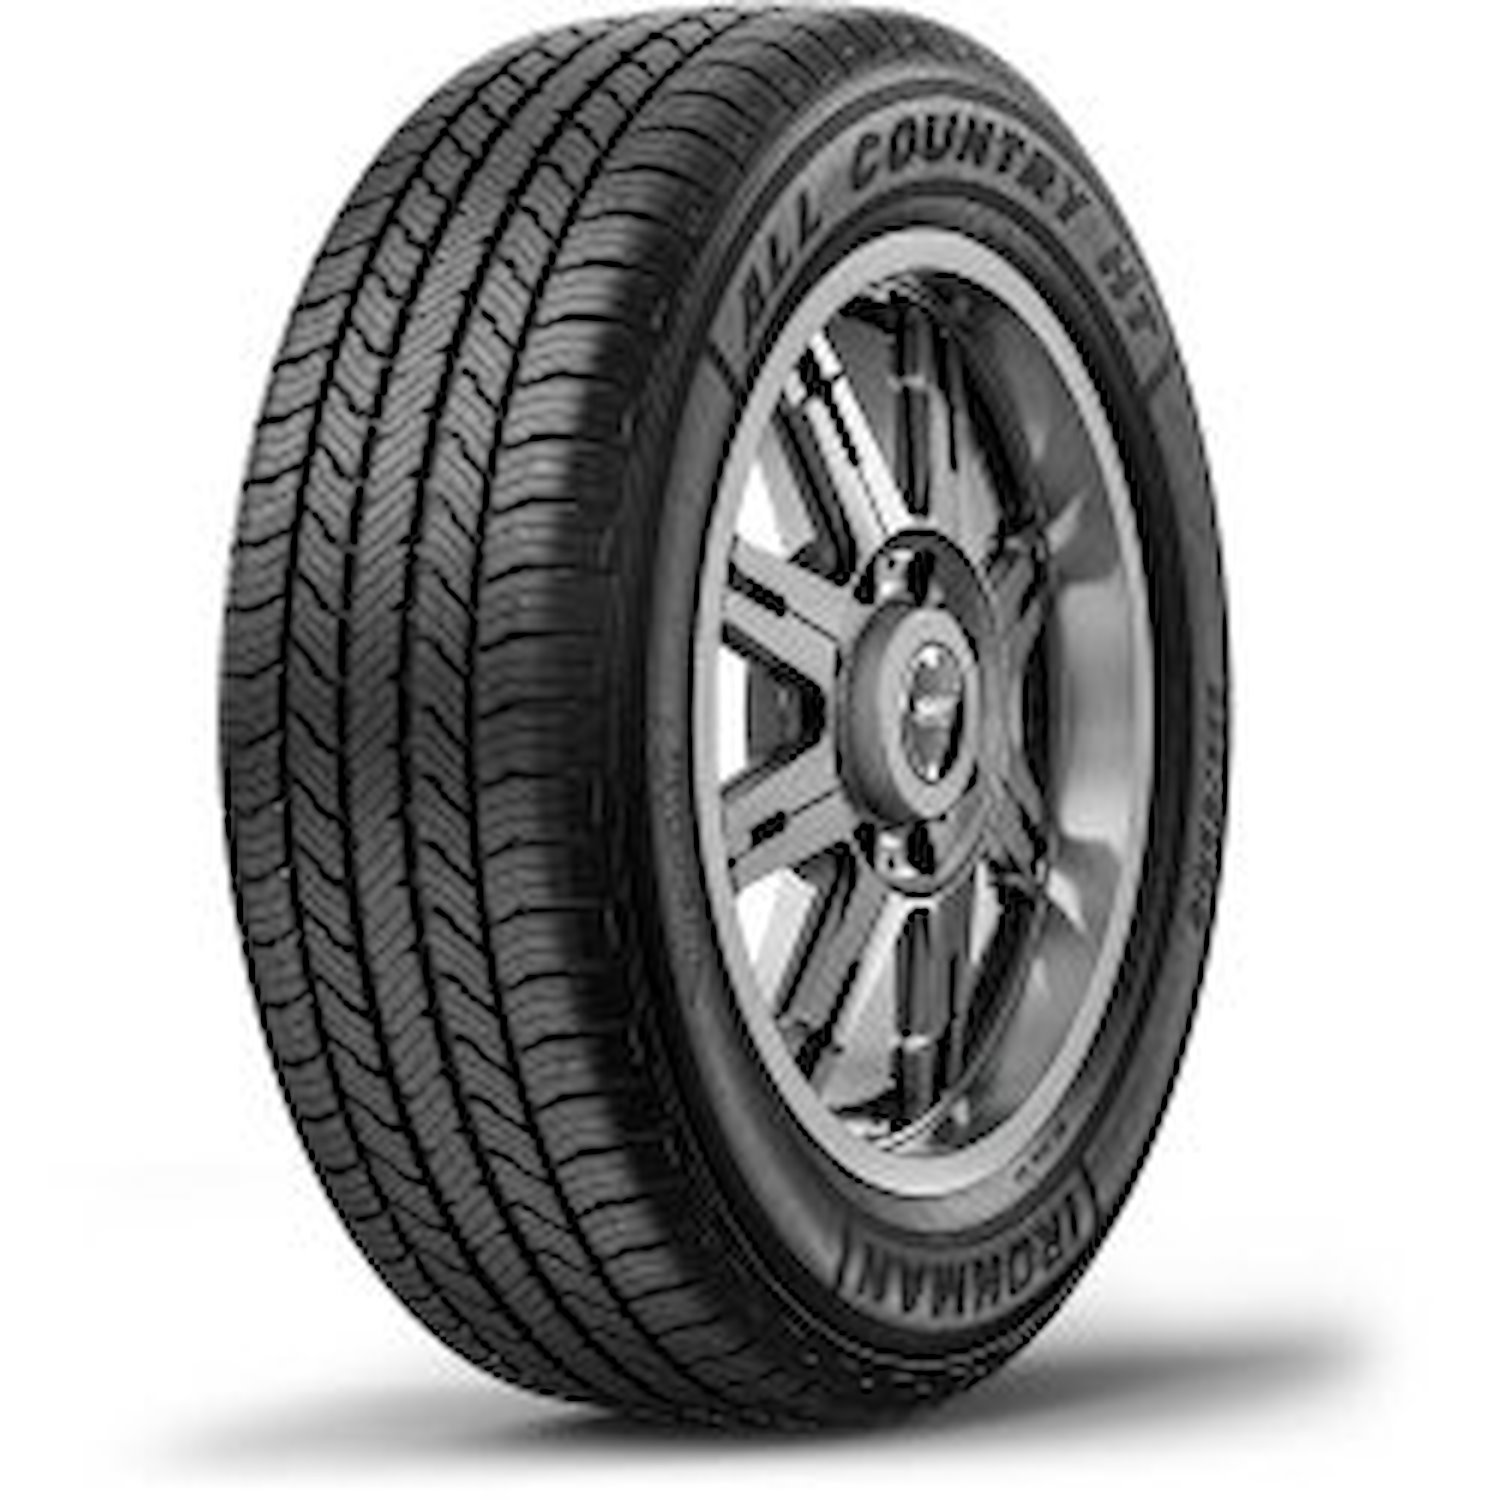 03074 All Country HT Tire, 265/65R17, 112T